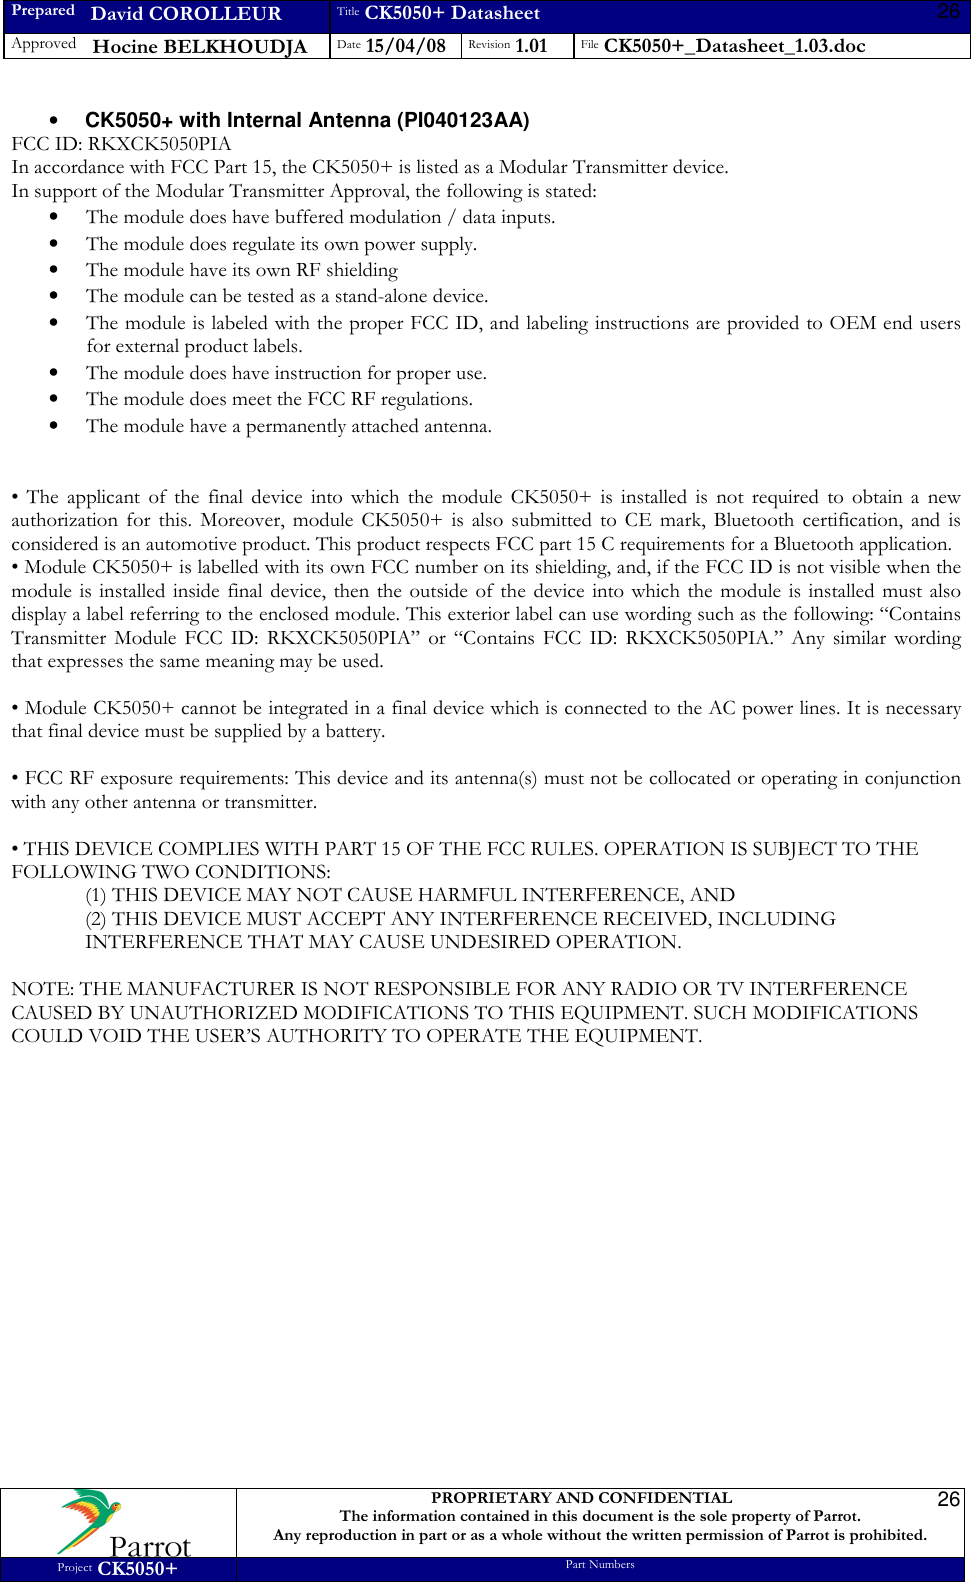 Prepared   David COROLLEUR Title CK5050+ Datasheet Approved   Hocine BELKHOUDJA Date 15/04/08 Revision 1.01 File CK5050+_Datasheet_1.03.doc     PROPRIETARY AND CONFIDENTIAL The information contained in this document is the sole property of Parrot. Any reproduction in part or as a whole without the written permission of Parrot is prohibited. Project CK5050+ Part Numbers   2626• CK5050+ with Internal Antenna (PI040123AA) FCC ID: RKXCK5050PIA In accordance with FCC Part 15, the CK5050+ is listed as a Modular Transmitter device. In support of the Modular Transmitter Approval, the following is stated: • The module does have buffered modulation / data inputs. • The module does regulate its own power supply. • The module have its own RF shielding • The module can be tested as a stand-alone device. • The module is labeled with the proper FCC ID, and labeling instructions are provided to OEM end users for external product labels. • The module does have instruction for proper use. • The module does meet the FCC RF regulations. • The module have a permanently attached antenna.   •  The  applicant  of  the  final  device  into  which  the  module  CK5050+  is  installed  is  not  required  to  obtain  a  new authorization  for  this.  Moreover,  module  CK5050+  is  also  submitted  to  CE  mark,  Bluetooth  certification,  and  is considered is an automotive product. This product respects FCC part 15 C requirements for a Bluetooth application. • Module CK5050+ is labelled with its own FCC number on its shielding, and, if the FCC ID is not visible when the module  is installed inside  final  device, then the  outside of the  device  into which the module  is installed  must  also display a label referring to the enclosed module. This exterior label can use wording such as the following: “Contains Transmitter  Module  FCC  ID:  RKXCK5050PIA”  or  “Contains FCC  ID:  RKXCK5050PIA.”  Any  similar  wording that expresses the same meaning may be used.  • Module CK5050+ cannot be integrated in a final device which is connected to the AC power lines. It is necessary that final device must be supplied by a battery.  • FCC RF exposure requirements: This device and its antenna(s) must not be collocated or operating in conjunction with any other antenna or transmitter.  • THIS DEVICE COMPLIES WITH PART 15 OF THE FCC RULES. OPERATION IS SUBJECT TO THE FOLLOWING TWO CONDITIONS: (1) THIS DEVICE MAY NOT CAUSE HARMFUL INTERFERENCE, AND (2) THIS DEVICE MUST ACCEPT ANY INTERFERENCE RECEIVED, INCLUDING INTERFERENCE THAT MAY CAUSE UNDESIRED OPERATION.  NOTE: THE MANUFACTURER IS NOT RESPONSIBLE FOR ANY RADIO OR TV INTERFERENCE CAUSED BY UNAUTHORIZED MODIFICATIONS TO THIS EQUIPMENT. SUCH MODIFICATIONS COULD VOID THE USER’S AUTHORITY TO OPERATE THE EQUIPMENT.   